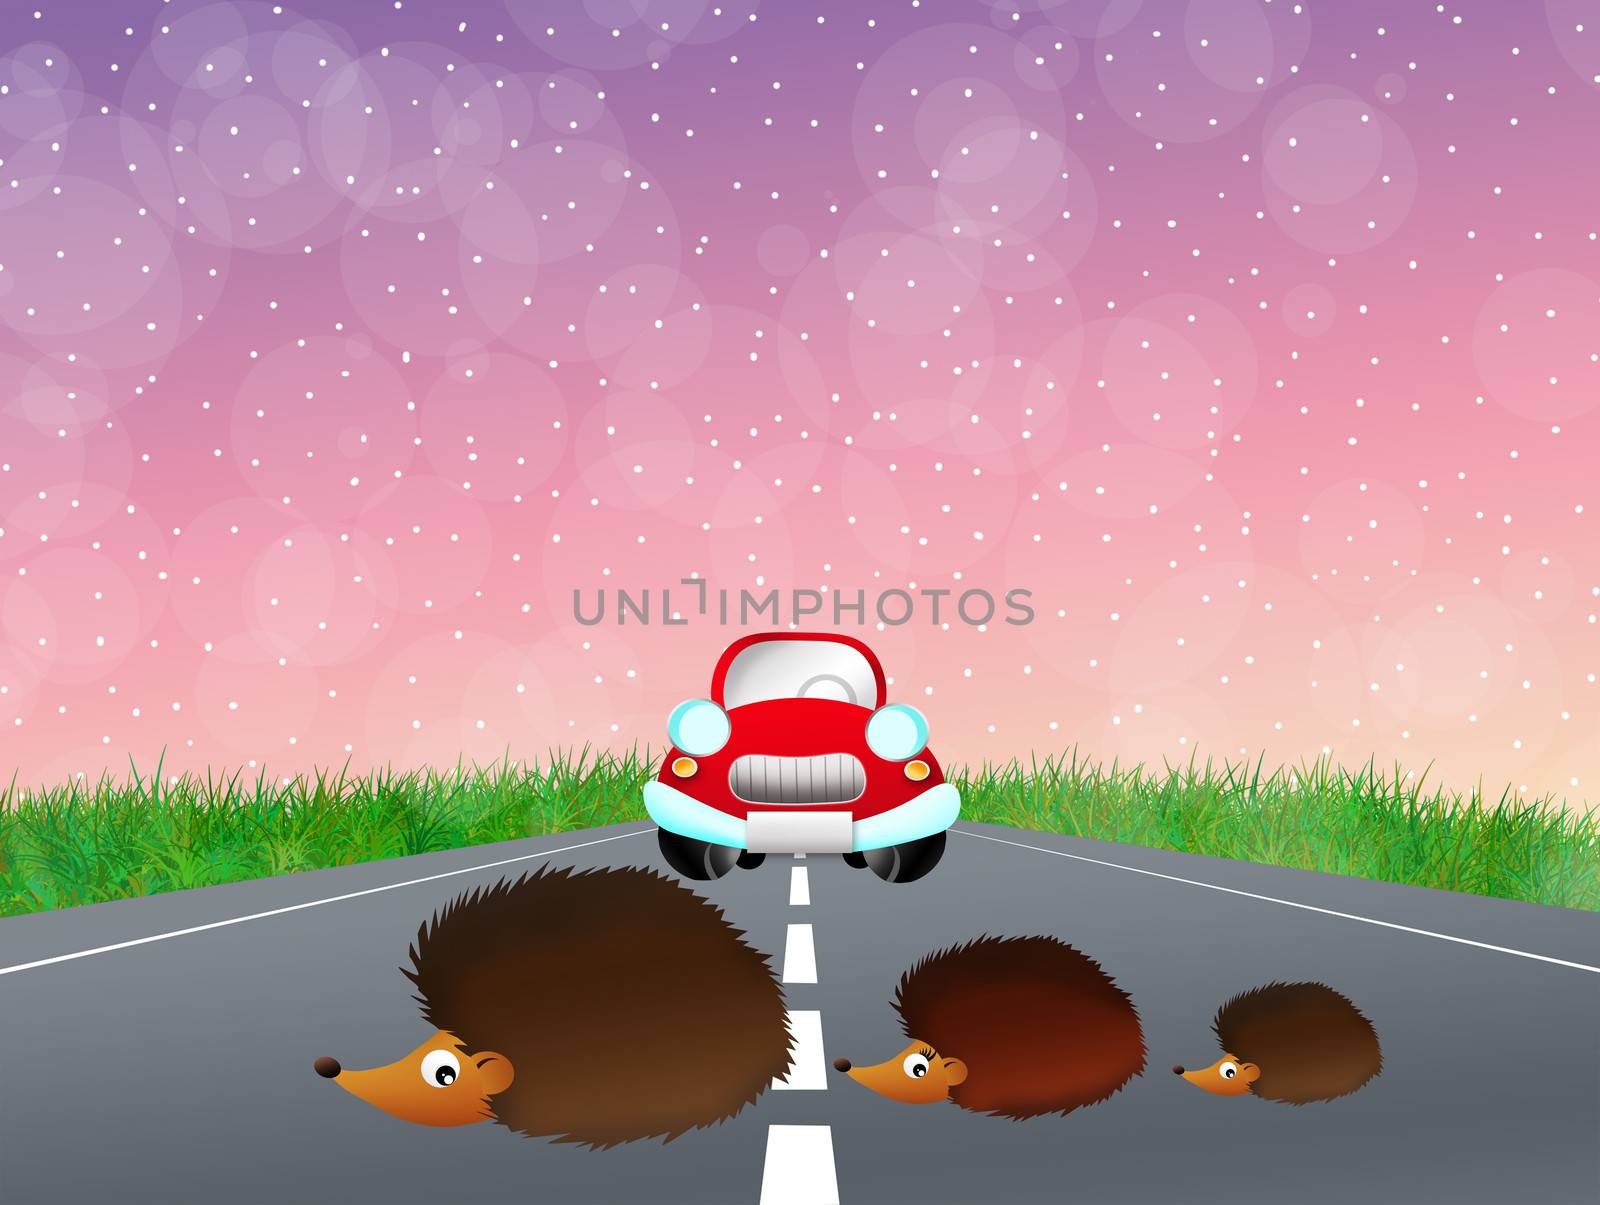 Hedgehogs on the road by adrenalina